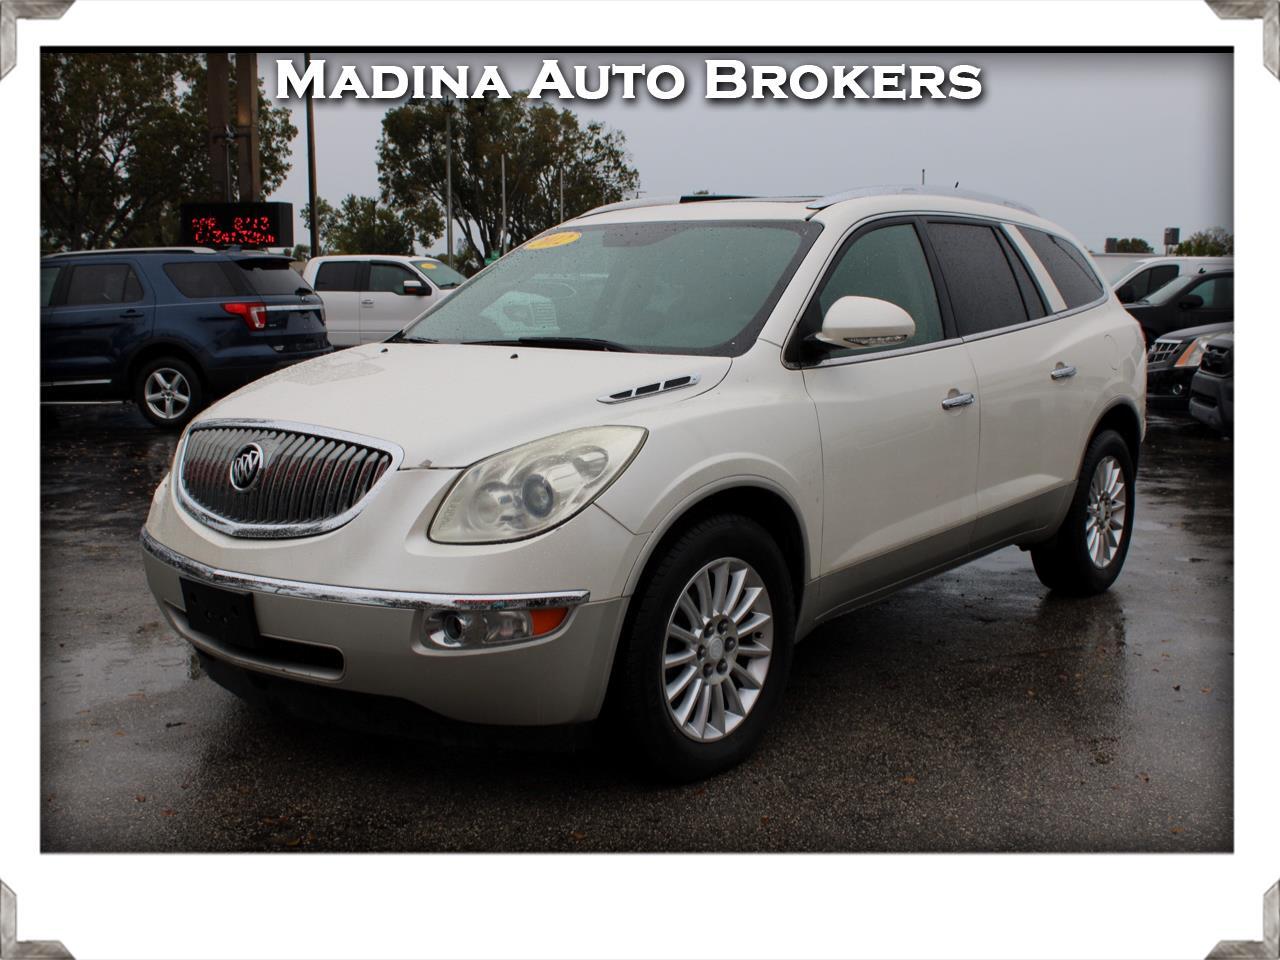 2012 Buick Enclave Leather AWD